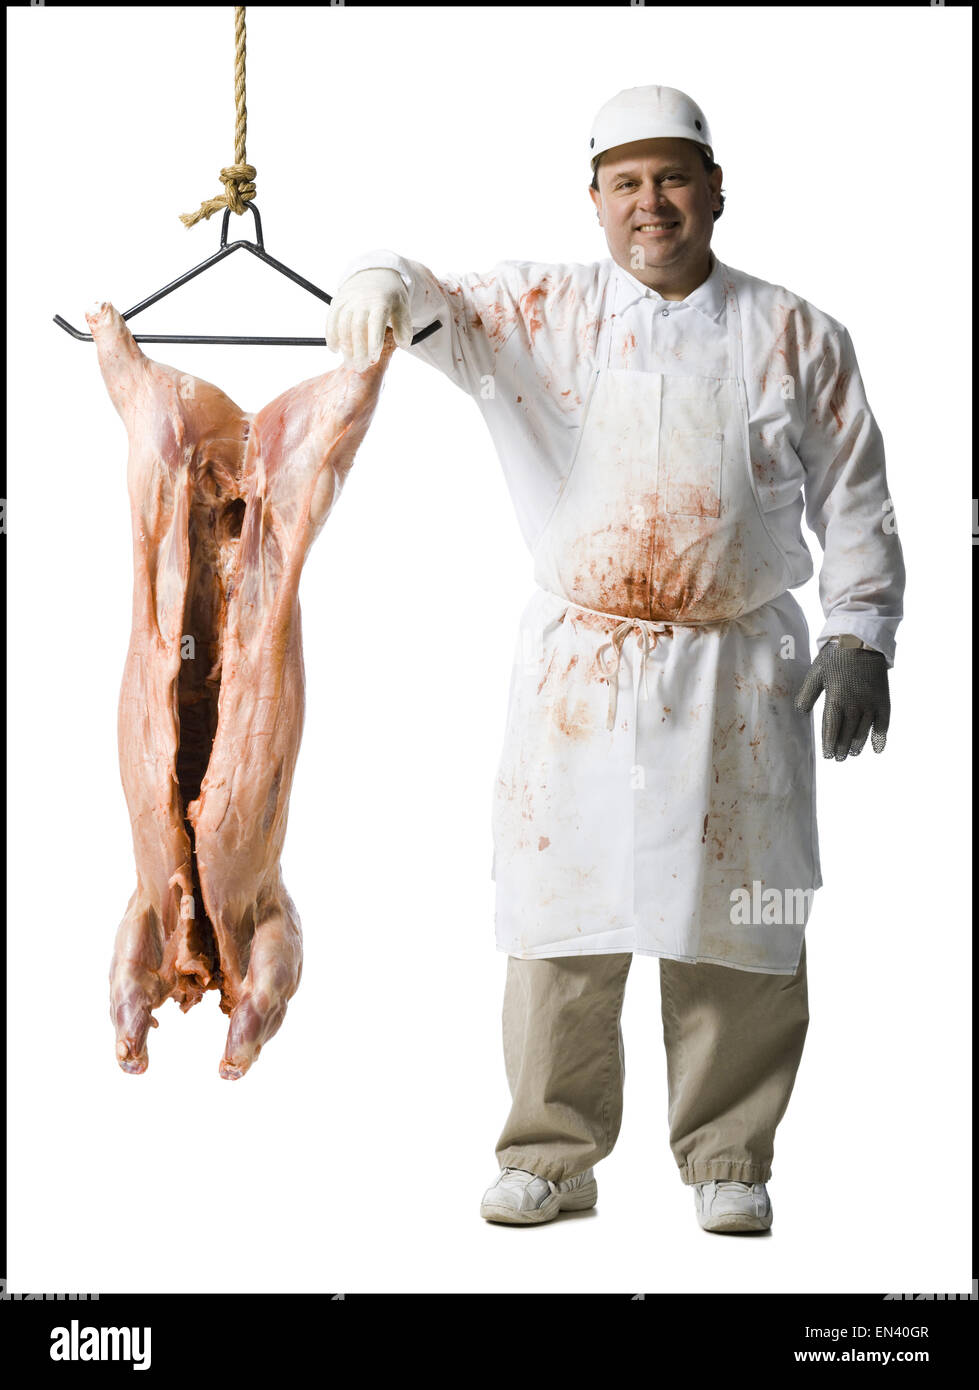 Butcher standing with hanging carcass and knife Stock Photo